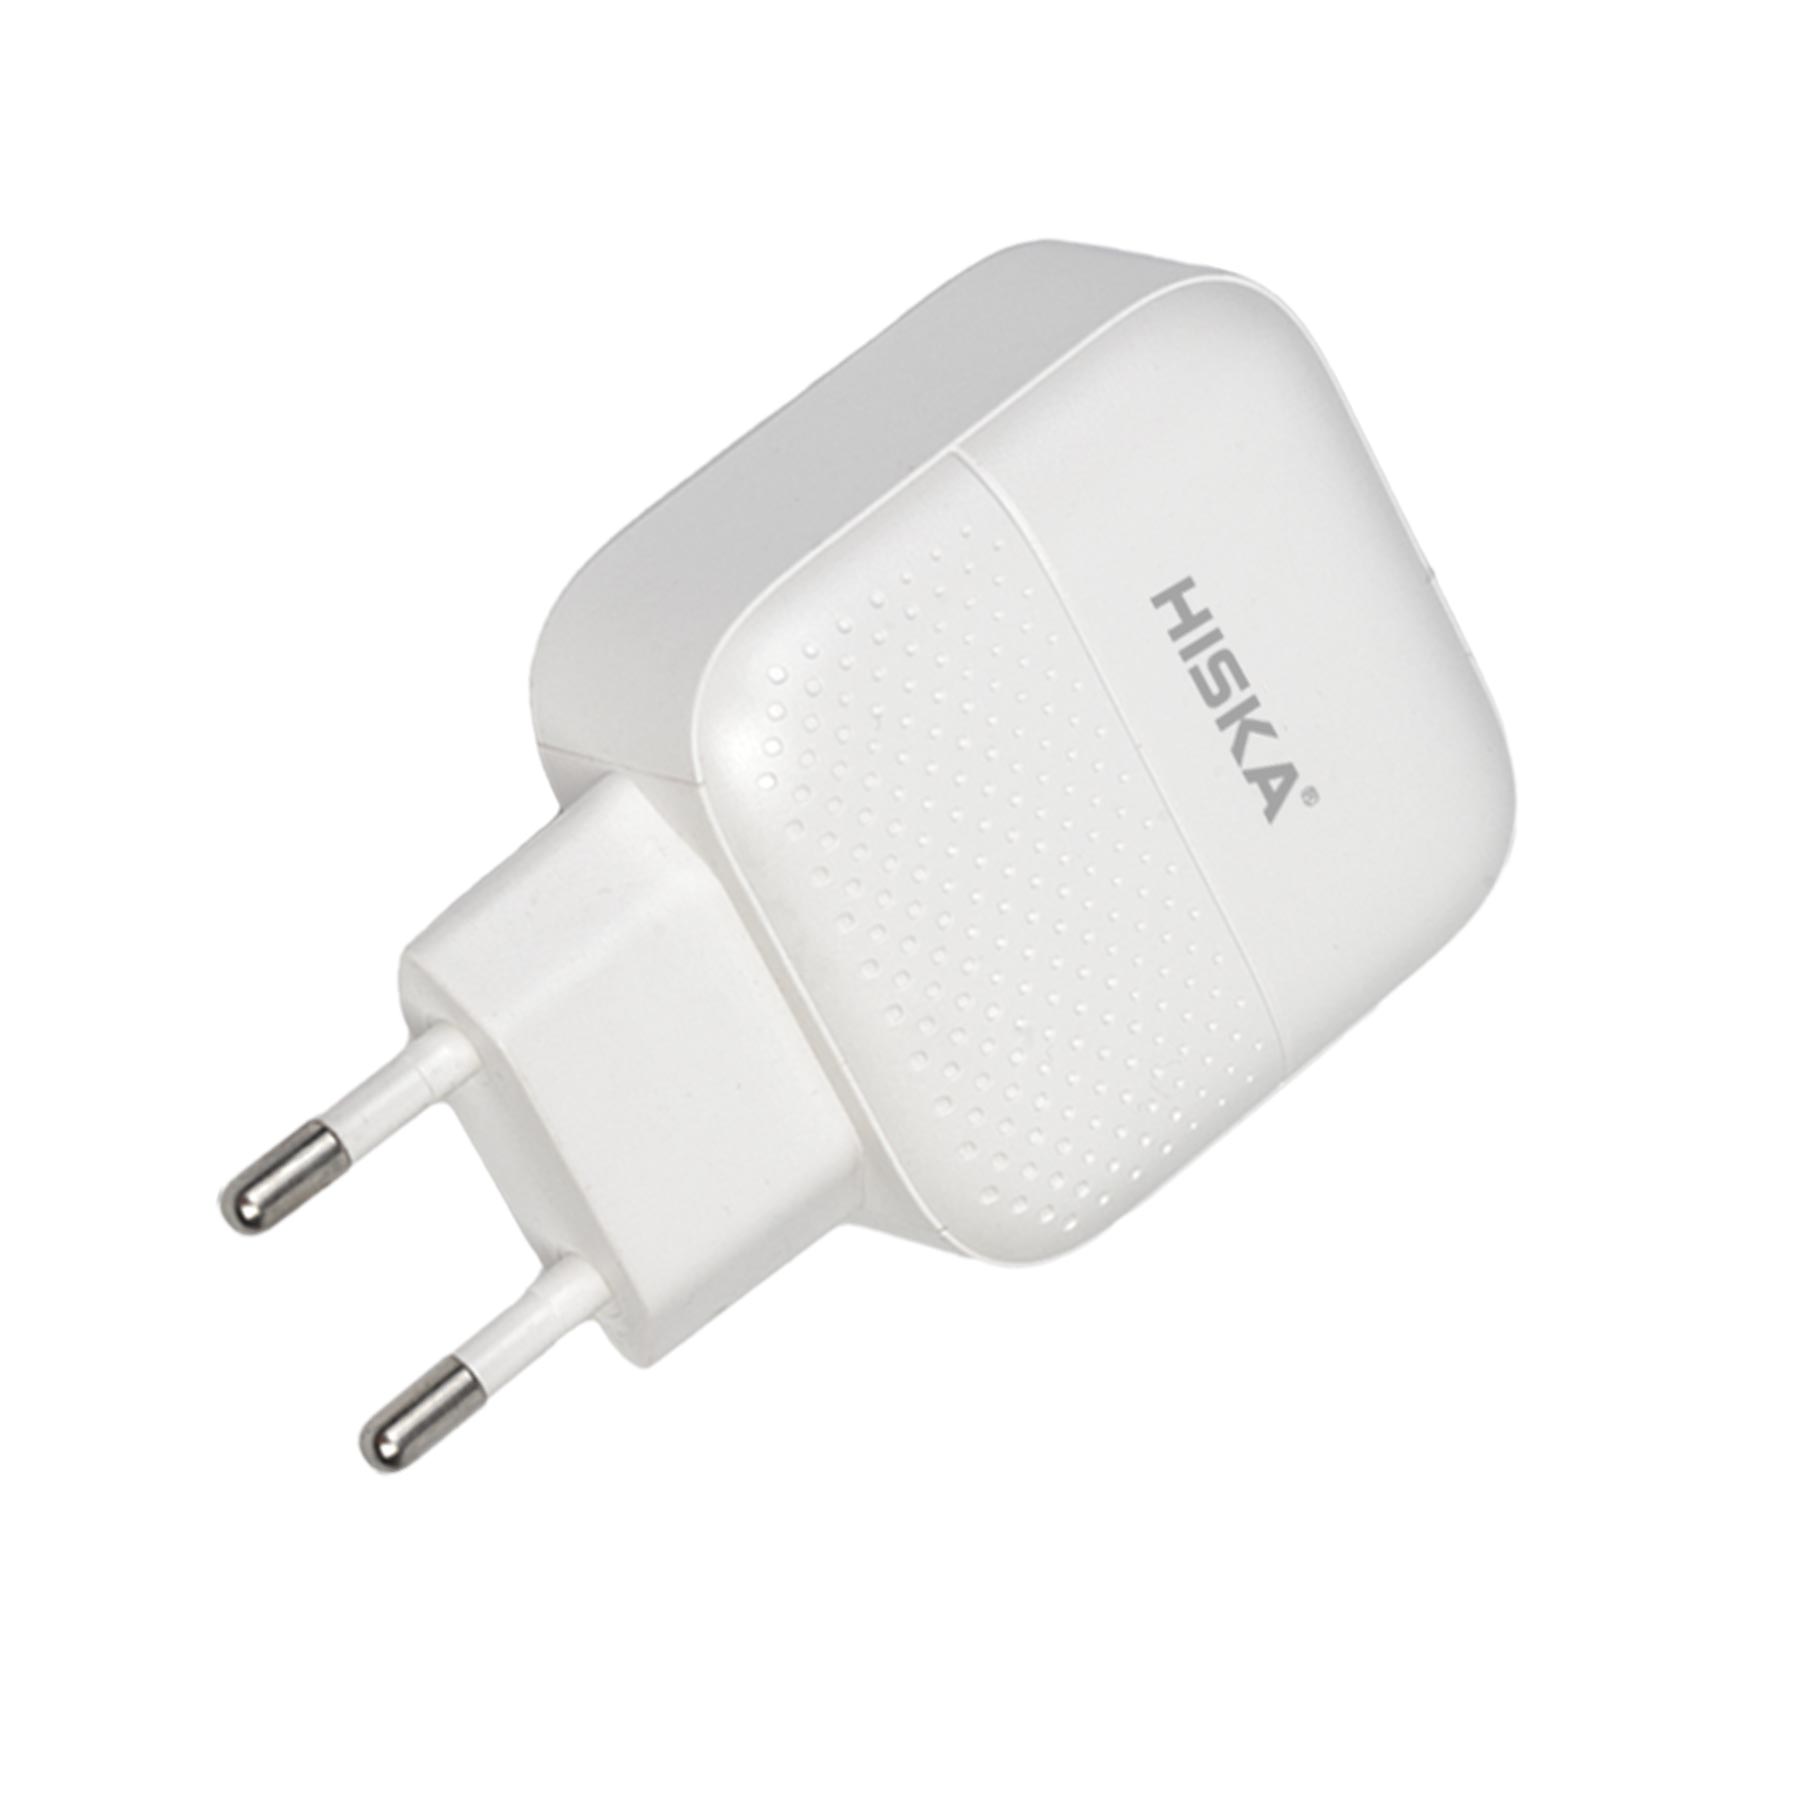 HK-2102 Wall charger H-111Q